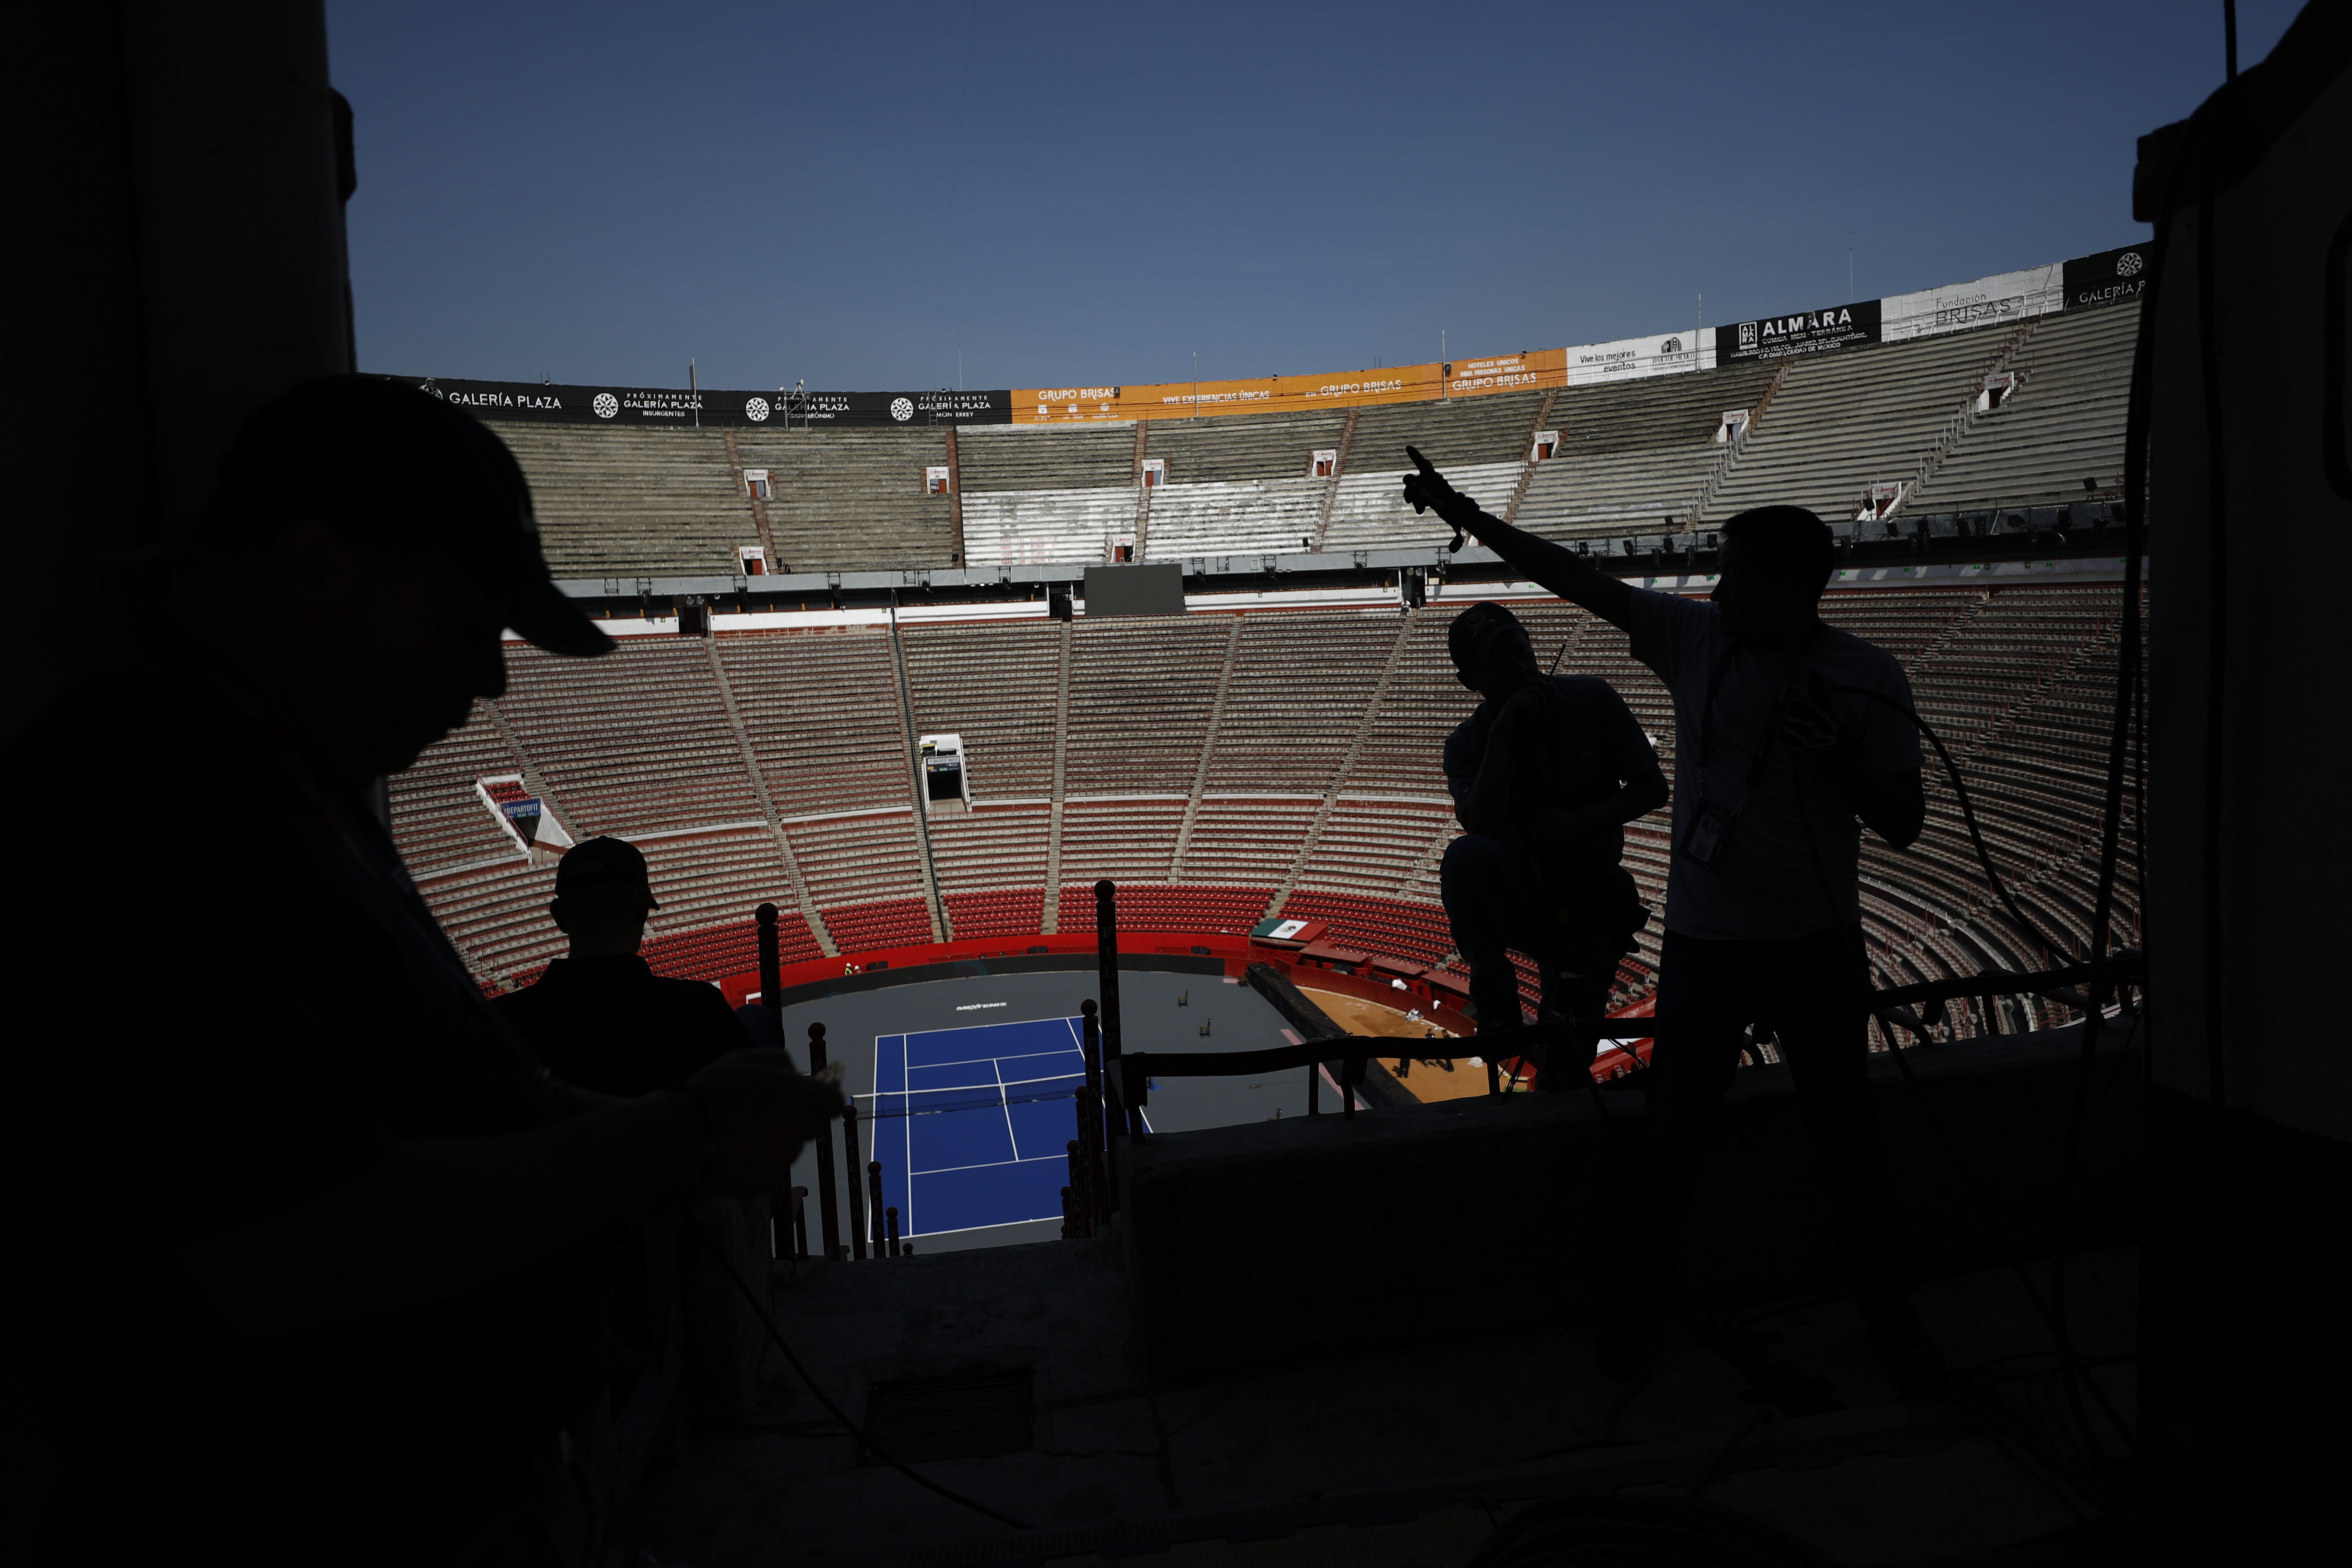 Workers are silhouetted against the Plaza de Toros Mexico bullfighting arena that has been converted to host an exhibition tennis match between Swiss great Roger Federer and German rival Alexander Zverev, in Mexico City, Friday, Nov. 22, 2019. The venue, recognized as the largest bullring in the world, was chosen for the event because it has an estimated 42,000 seating capacity. (AP Photo/Rebecca Blackwell)